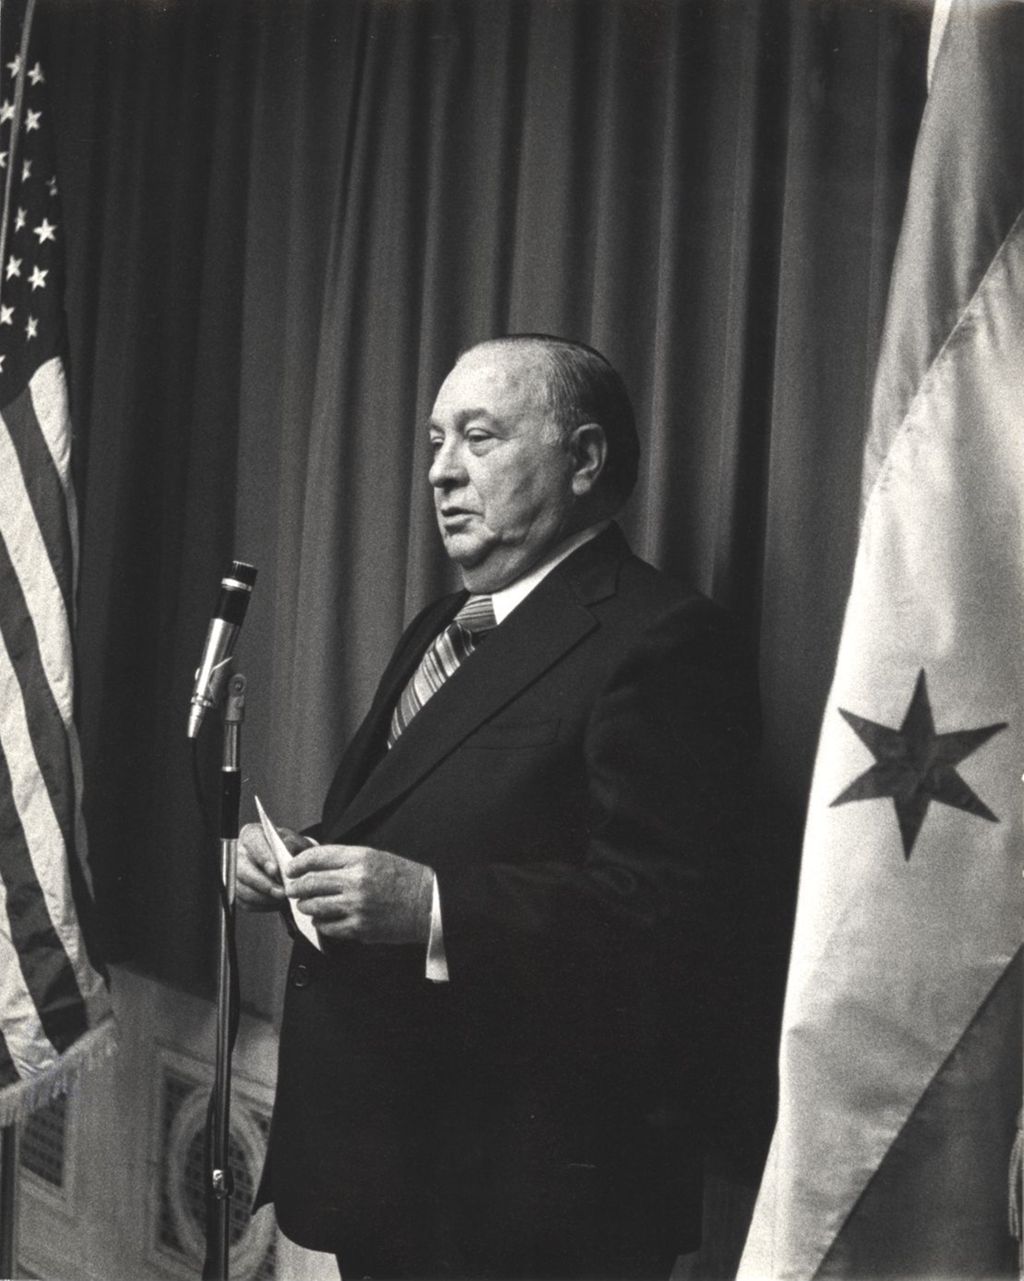 Miniature of Richard J. Daley at breakfast event on his last day of life